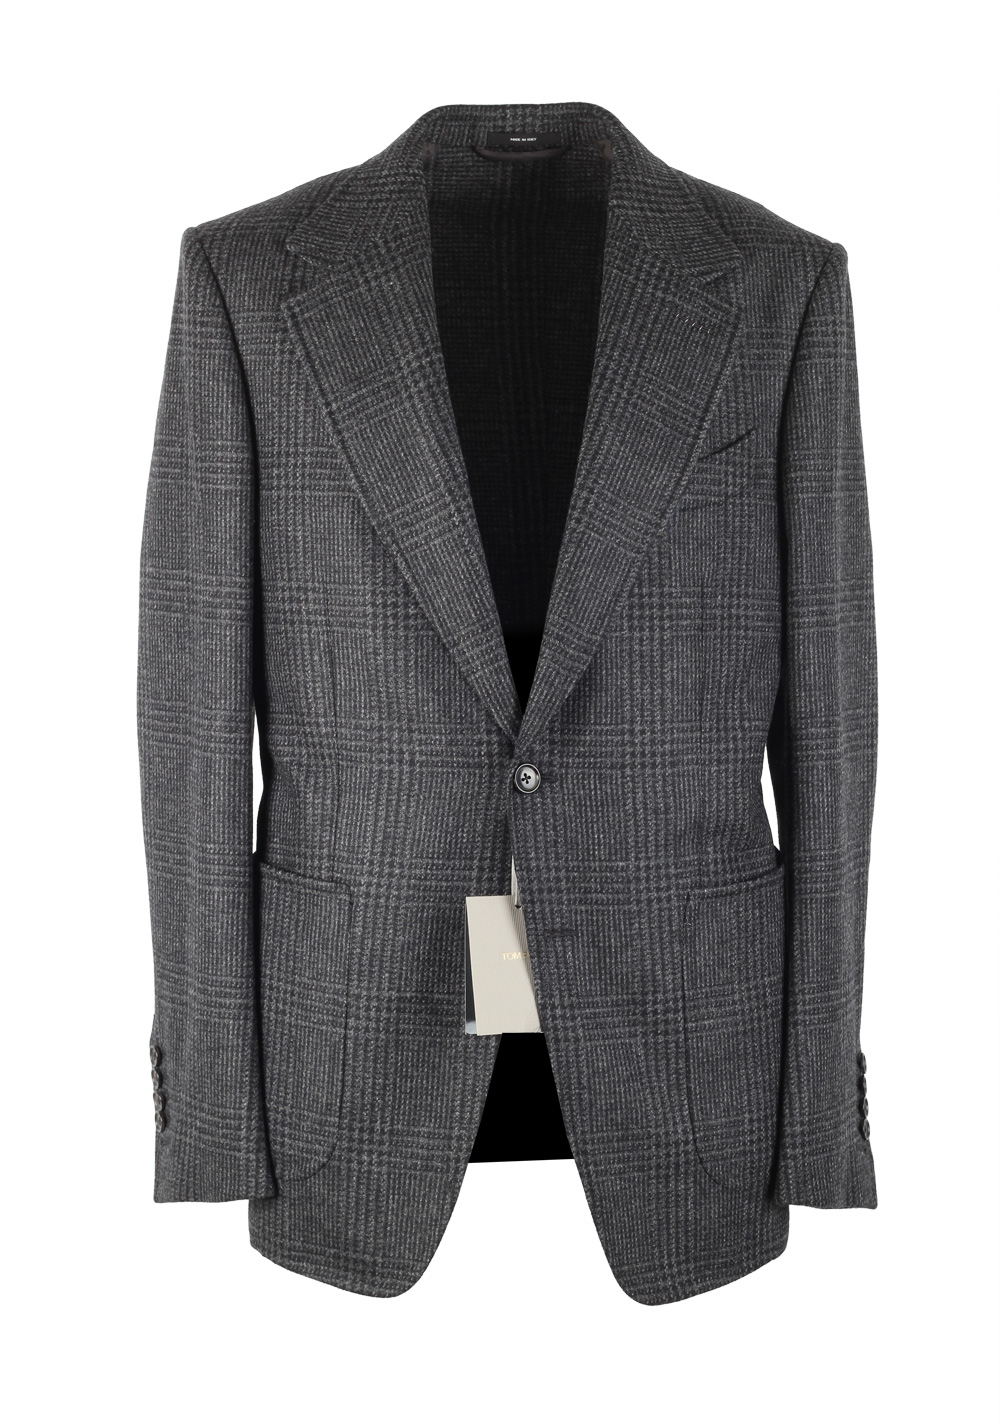 TOM FORD Shelton Checked Gray Sport Coat Size 54 / 44R U.S. In Wool ...